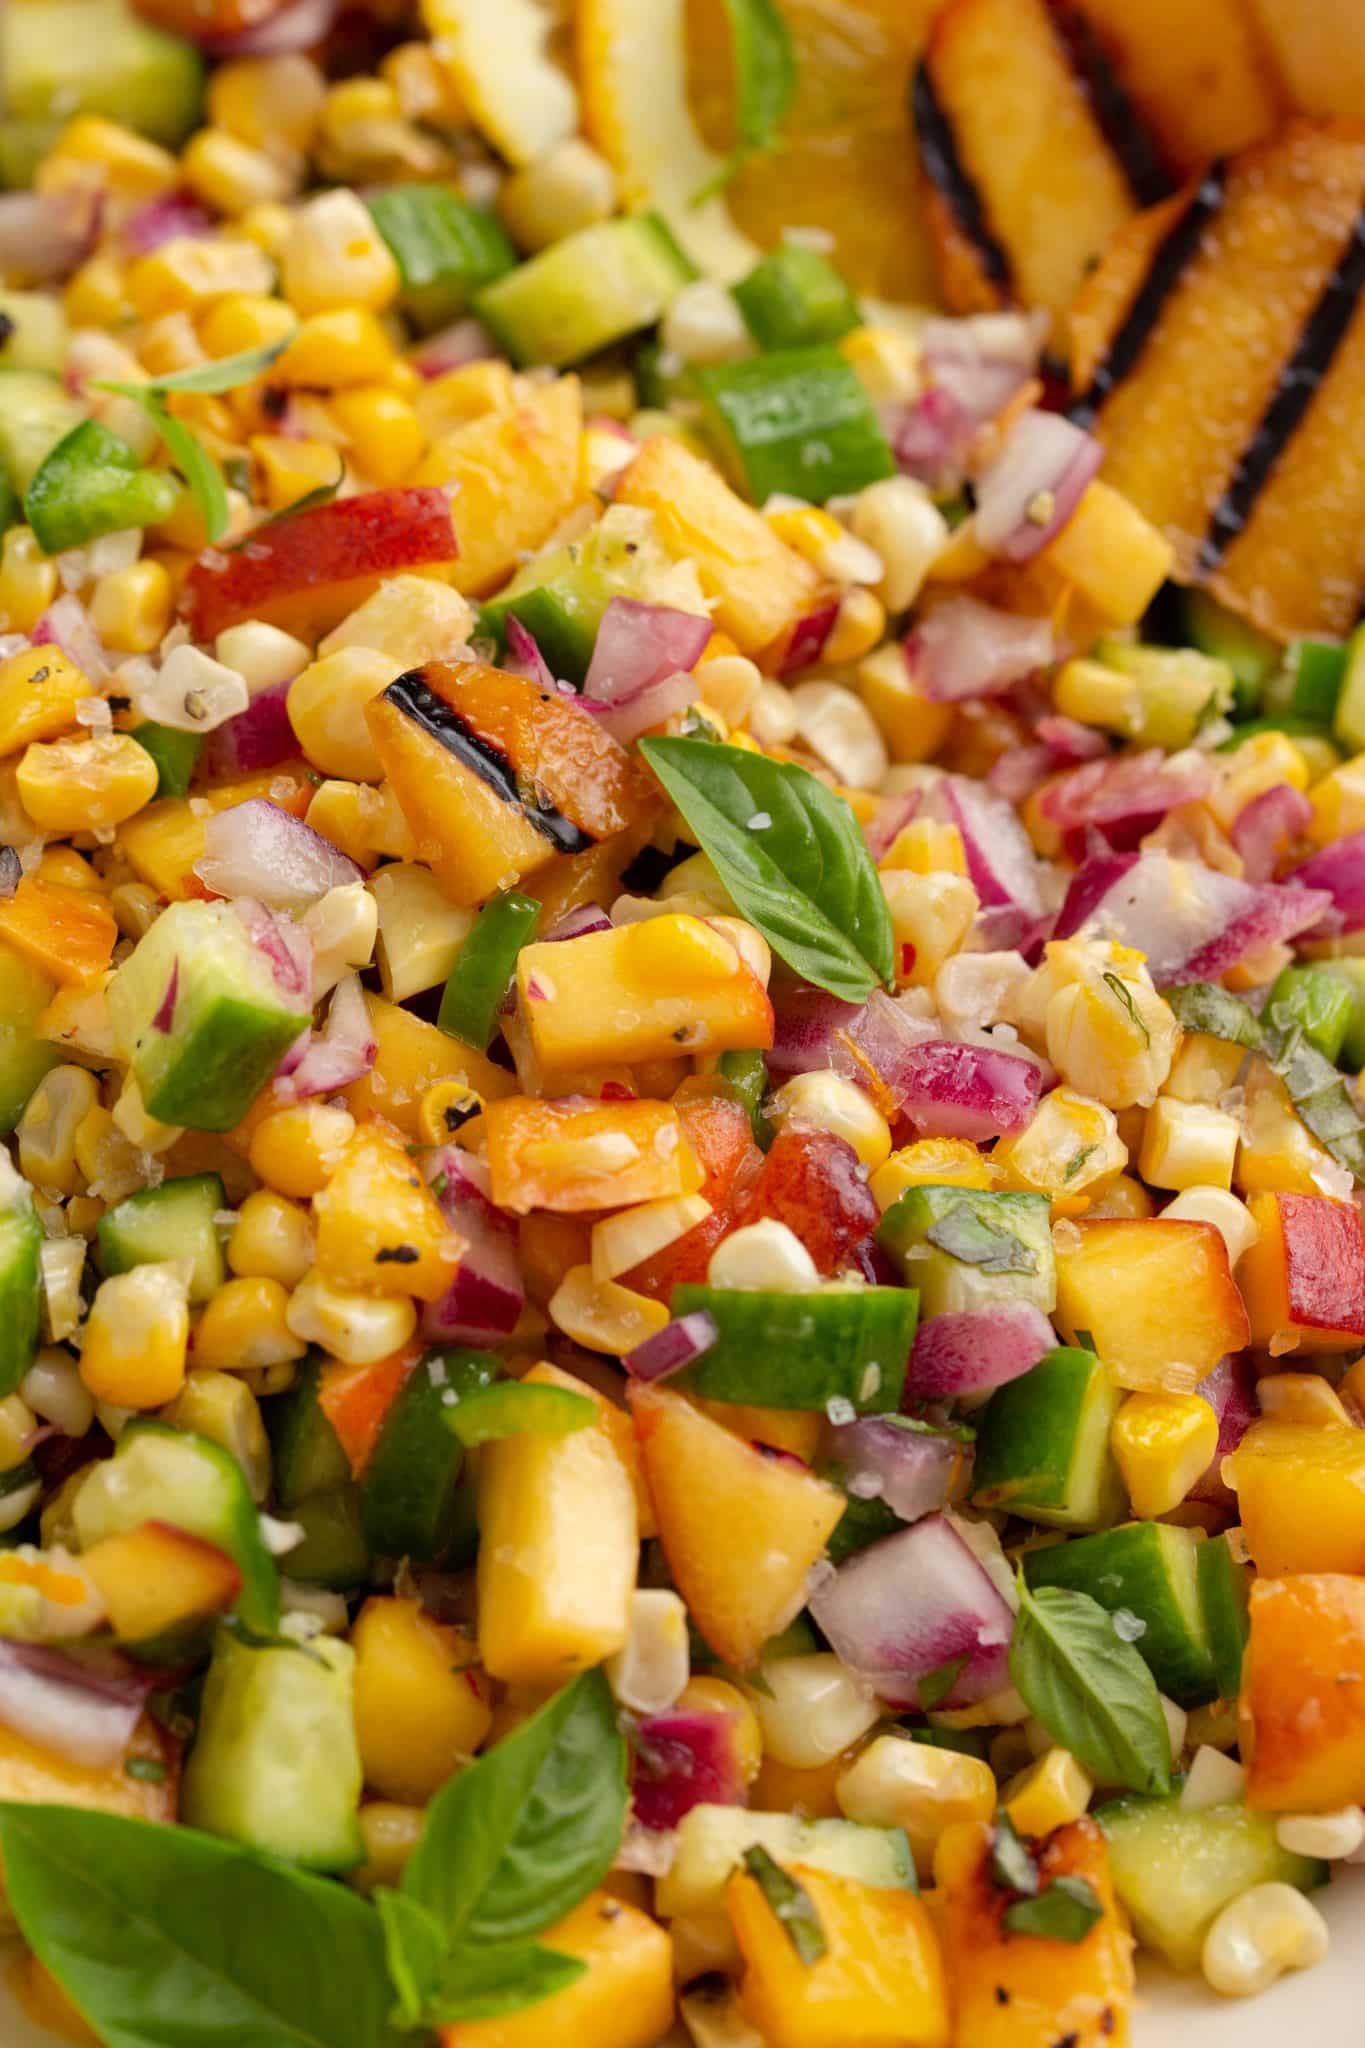 A vibrant salad with diced cucumbers, sweet corn, red onions, and peaches, garnished with fresh basil leaves and charred lemon wedges.